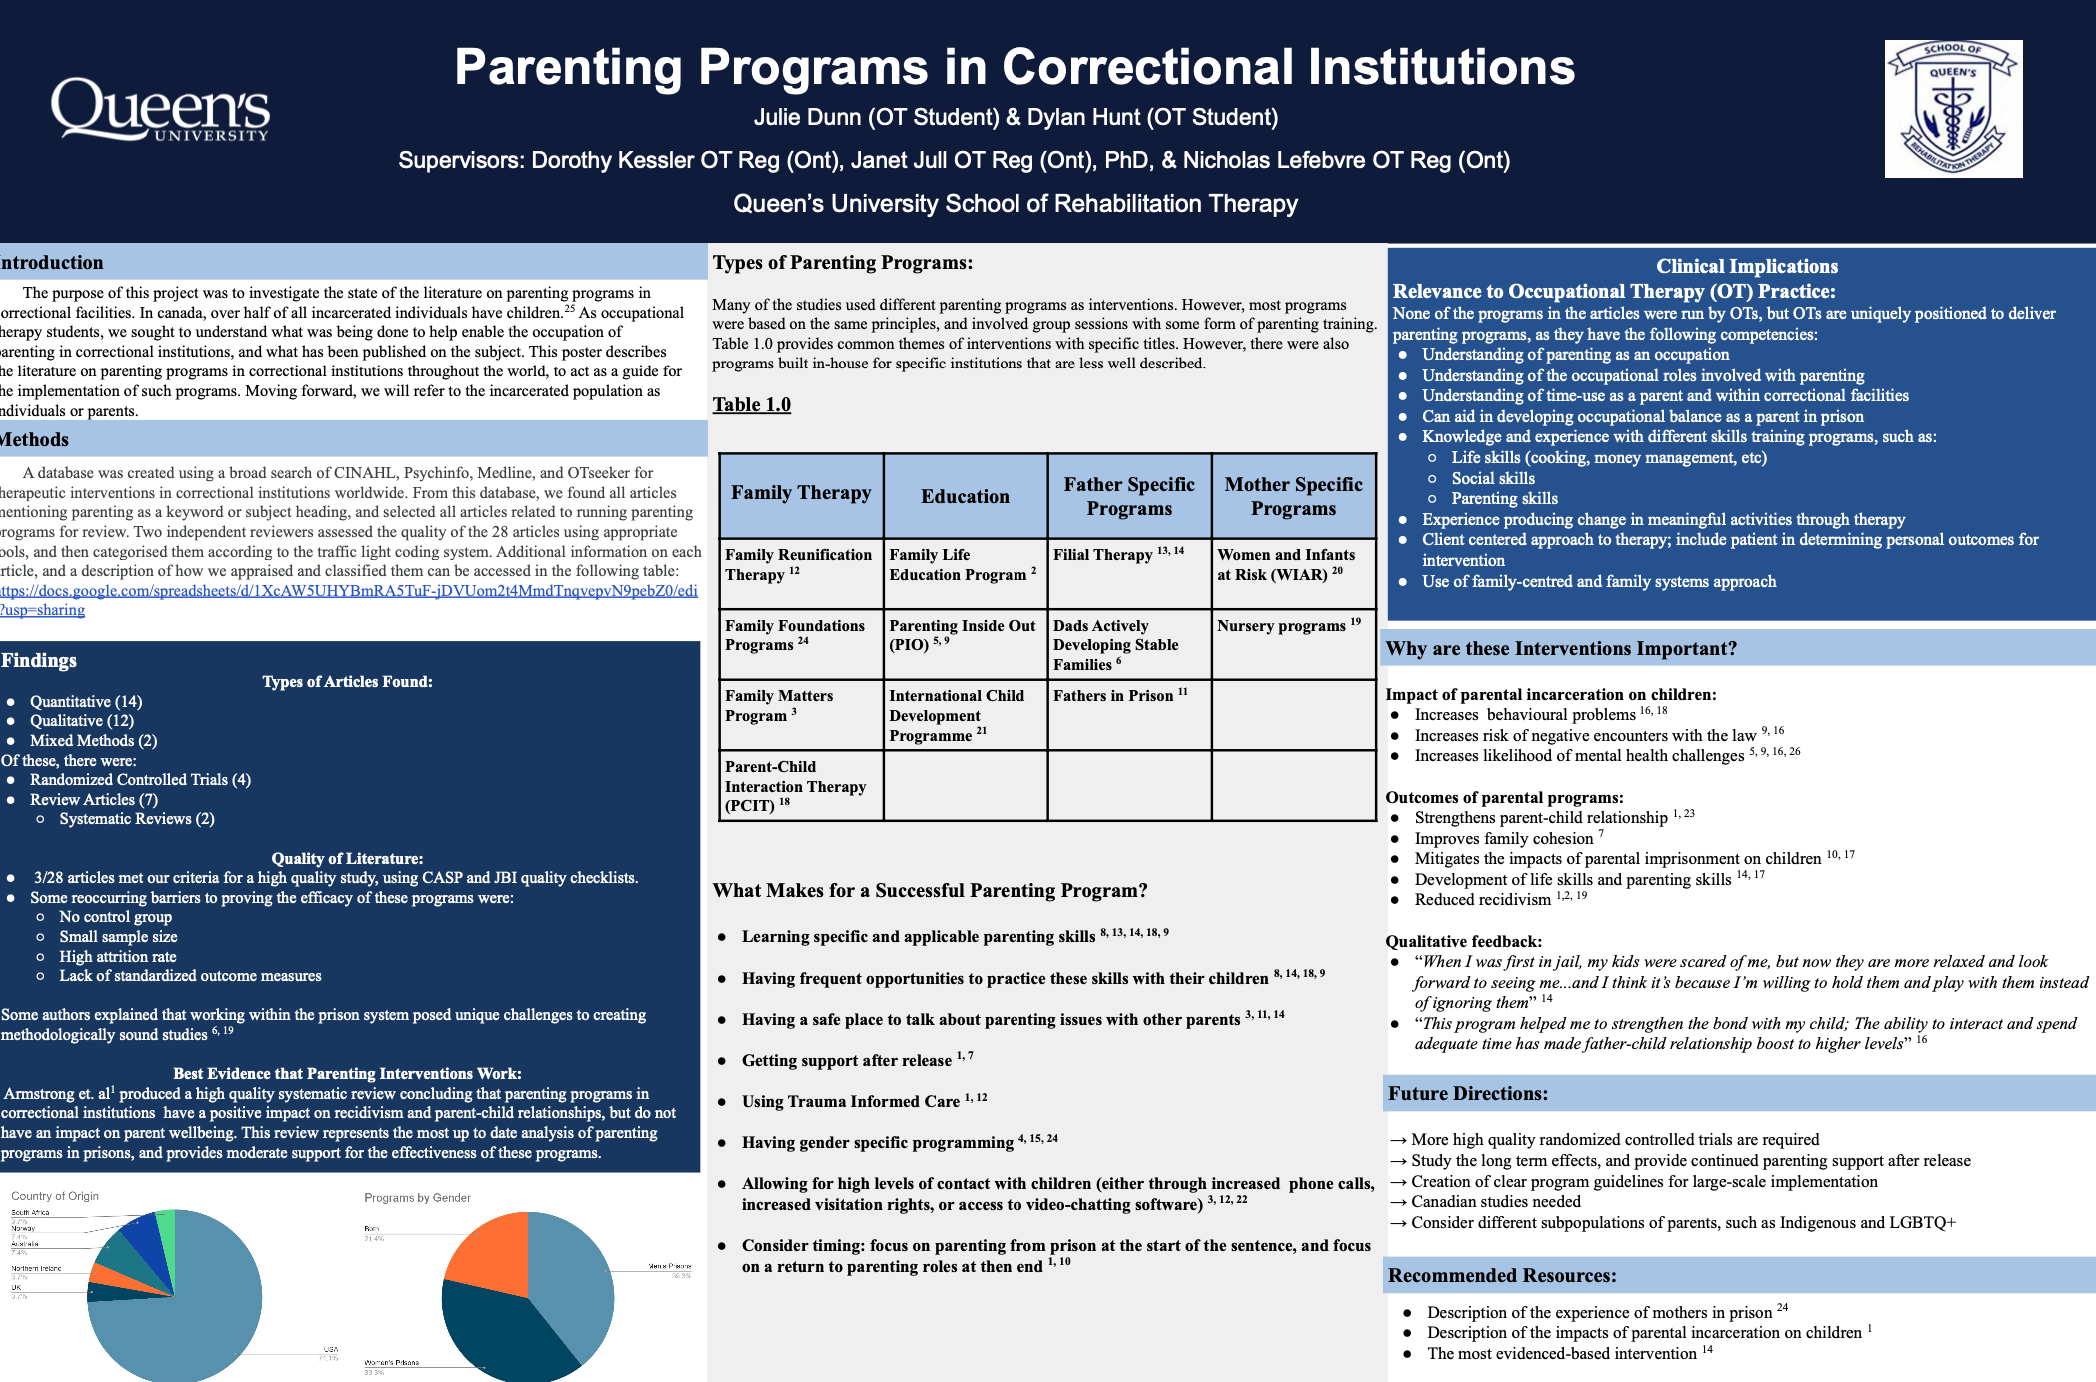 Parenting Programs in Correctional Institutions